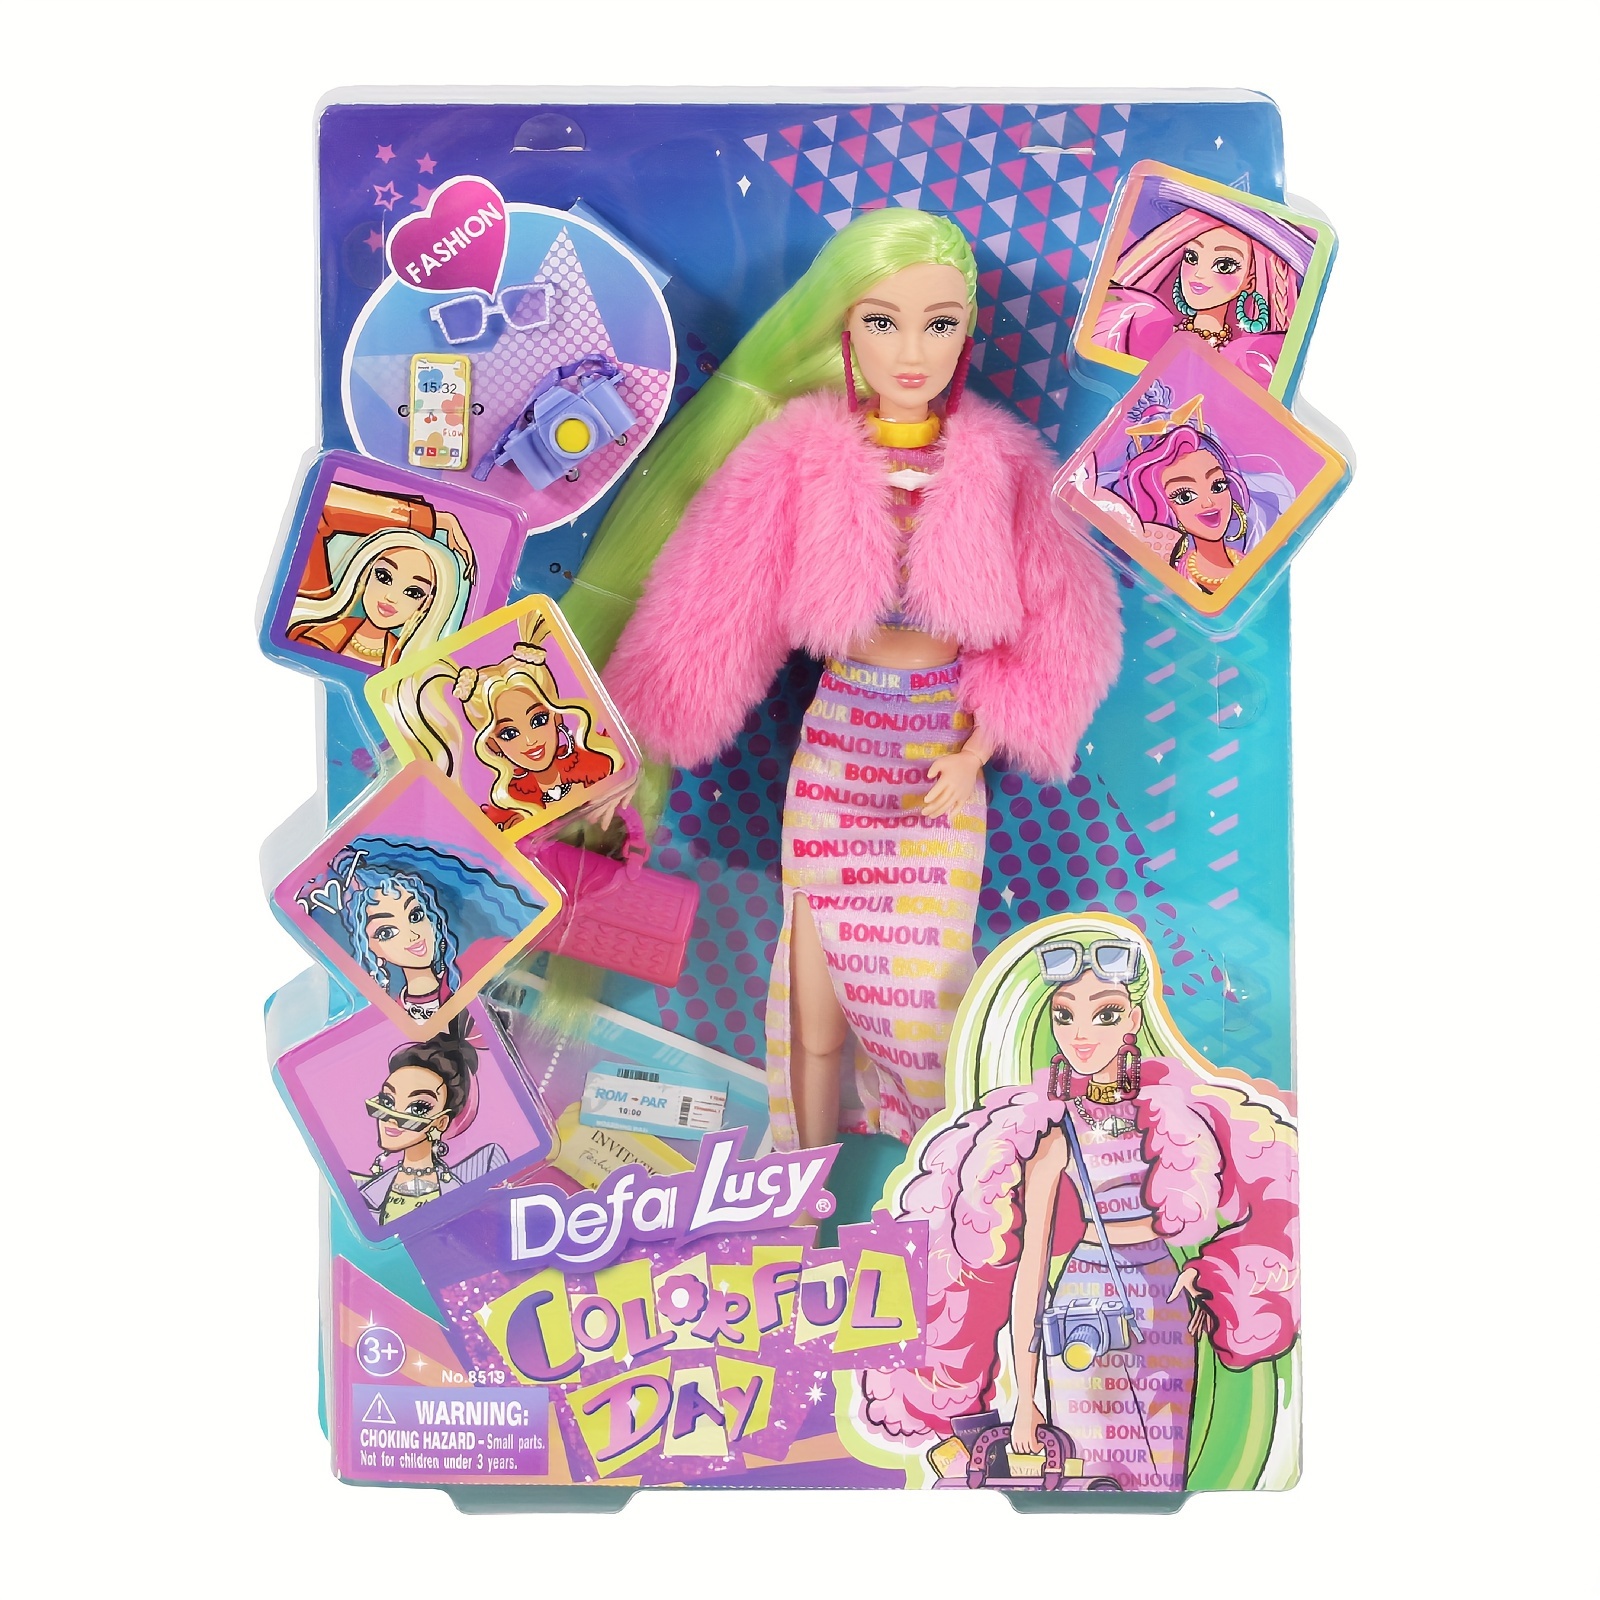 

Defa Lucy Dolls + Fashionable High- And Exquisite Accessories, Dolls With Multiple Joints In The Body Can Be Freely Styled, Collectible Series Dolls, Exquisite Gift Box Packaging